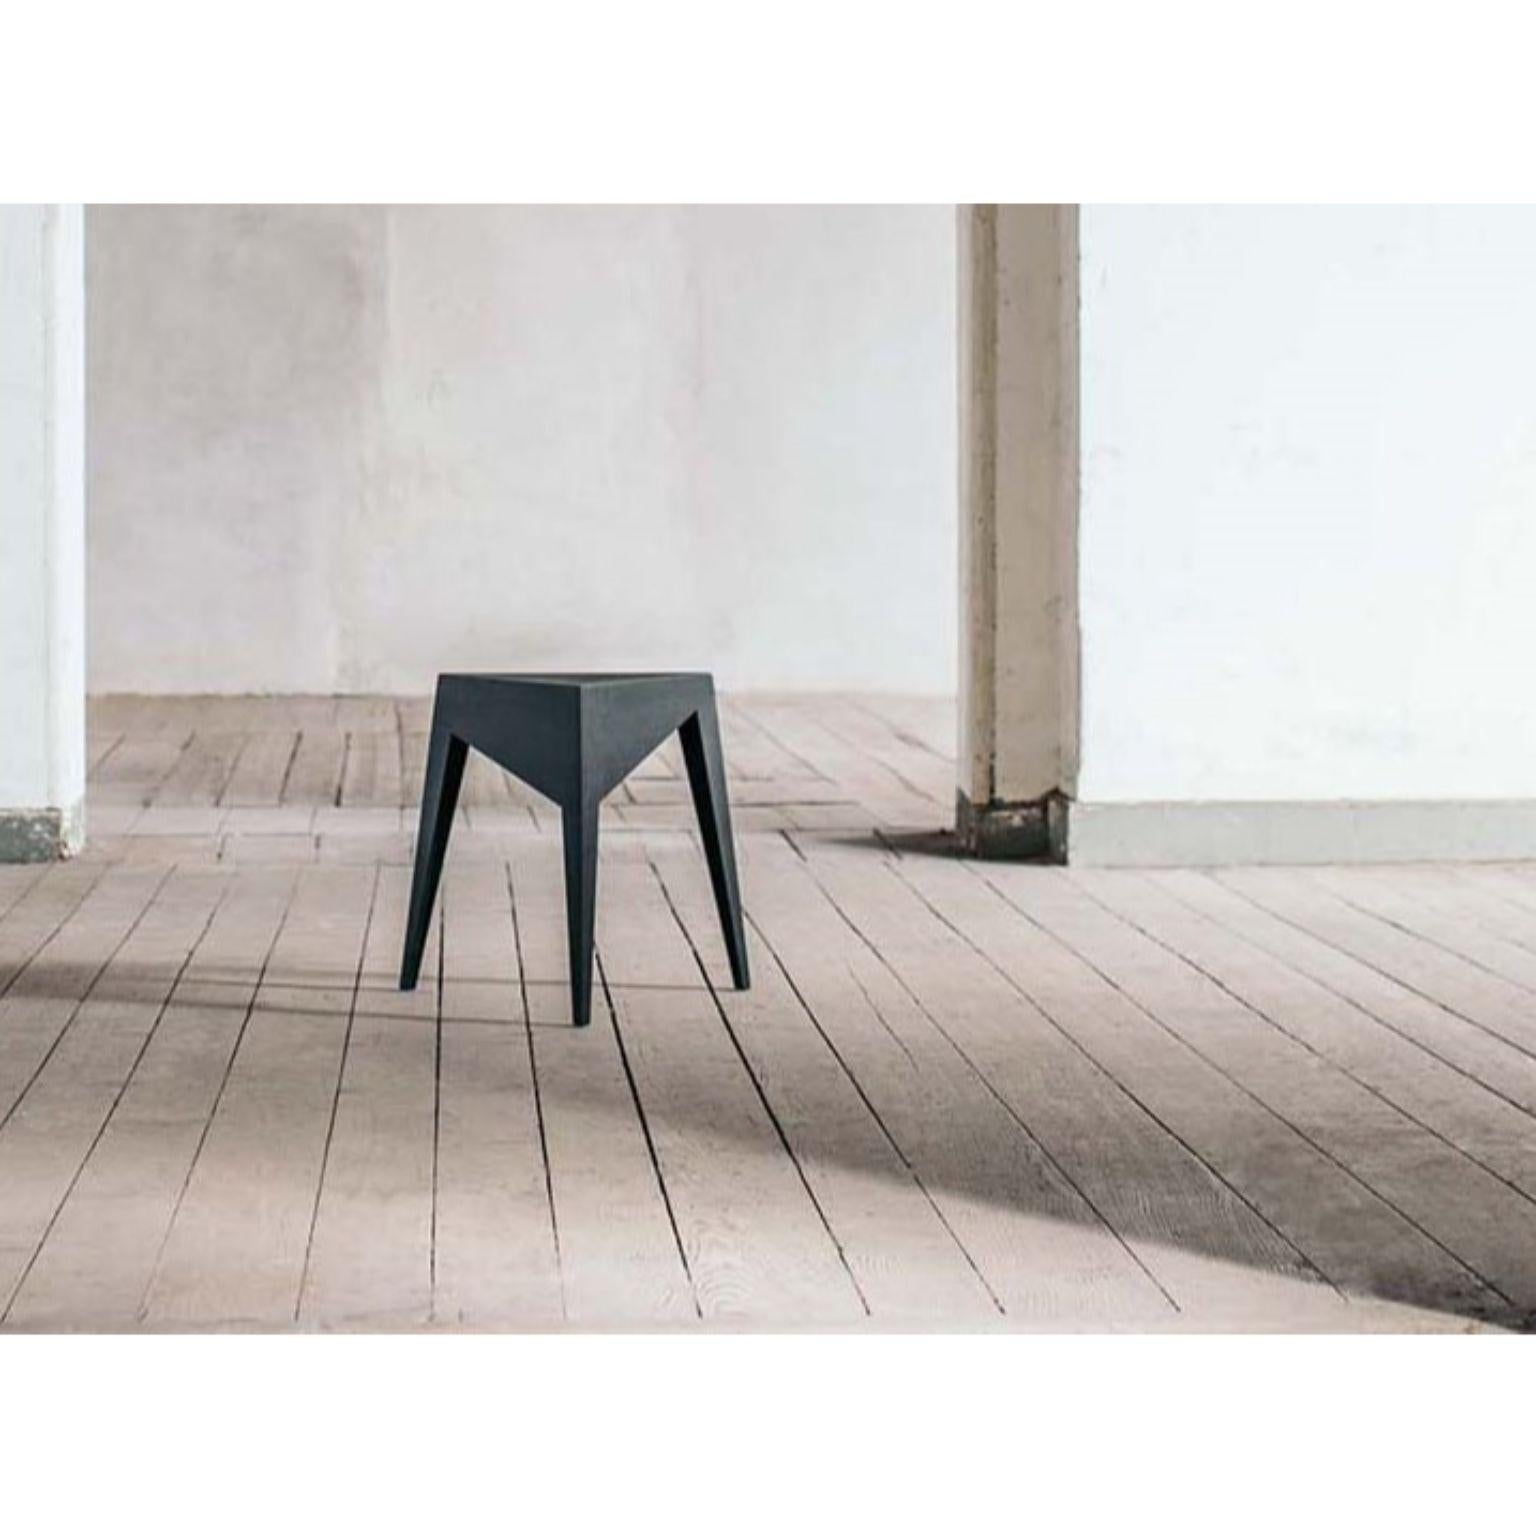 Tibalt stool by Matthias Scherzinger.
Dimensions: W 52 x L 45 x H 47 cm.
Materials: Solid wood oak.

Tibalt is a stackable stool concept with a convincing geometrical simplicity and aesthetic in which the filigree design is reduced to a minimal